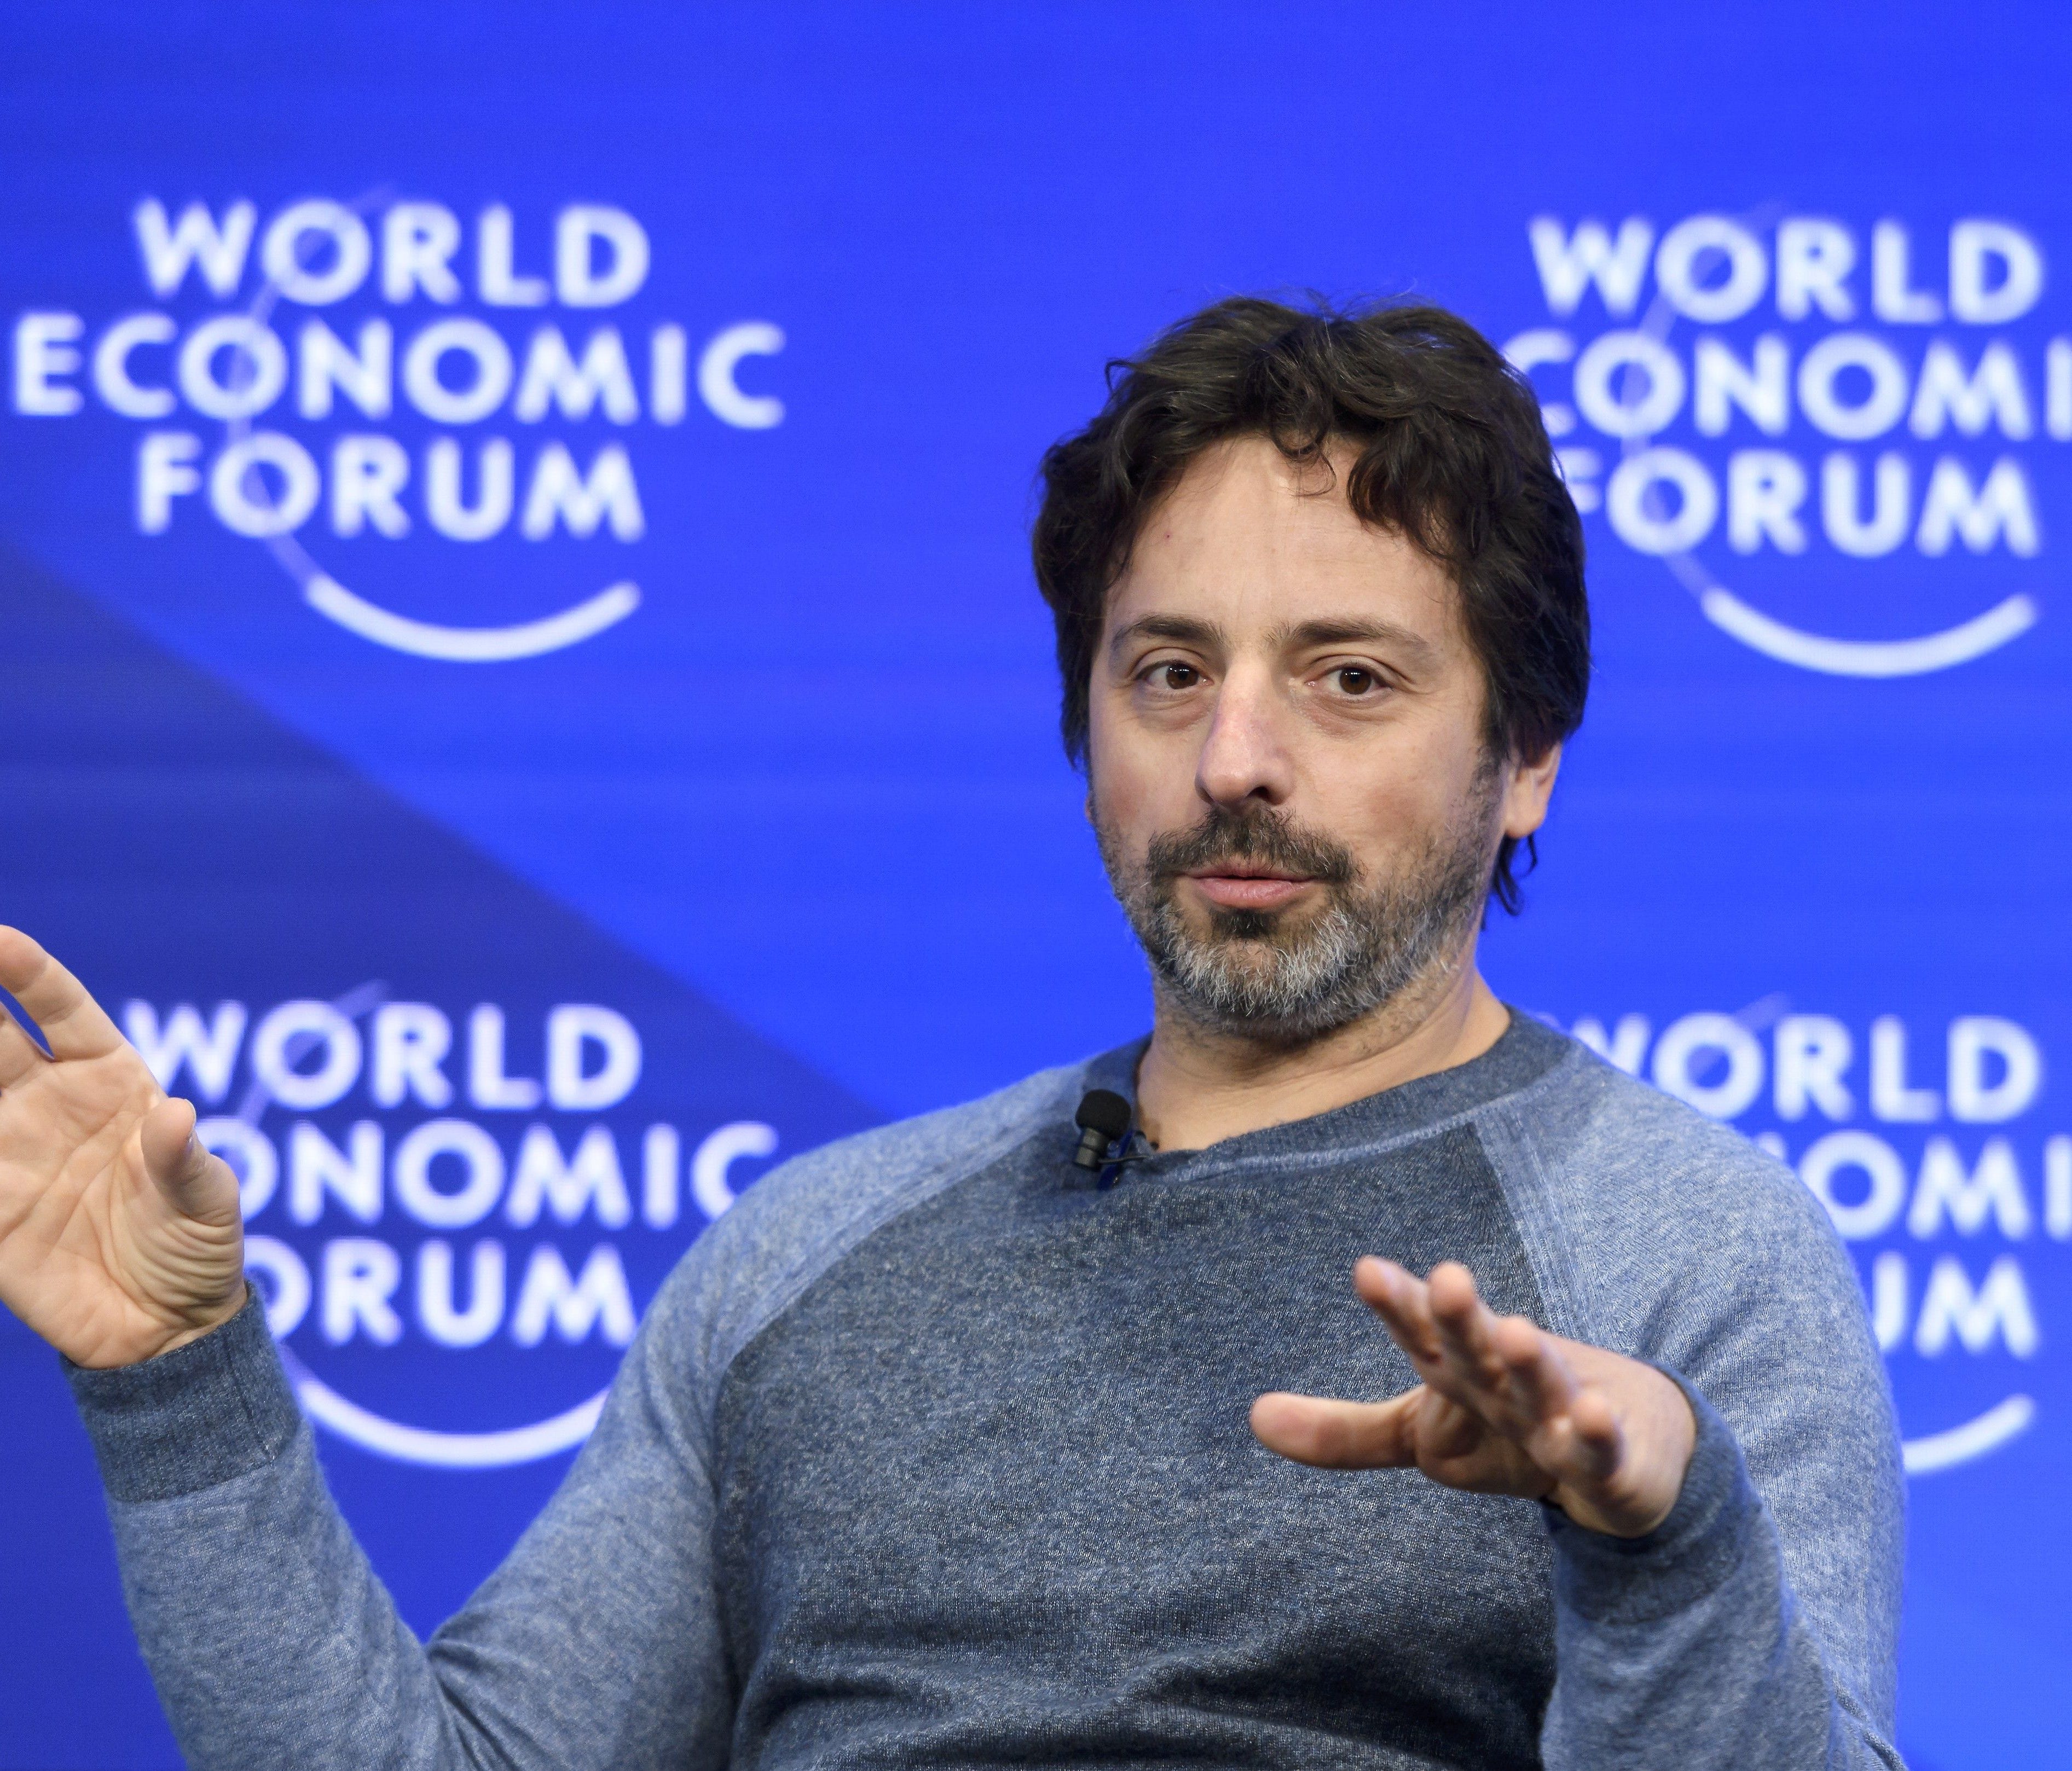 Google co-founder Sergey Brin, seen here at a World Economic Forum session in January, wants to build a $100 million blimp, according to the Guardian.